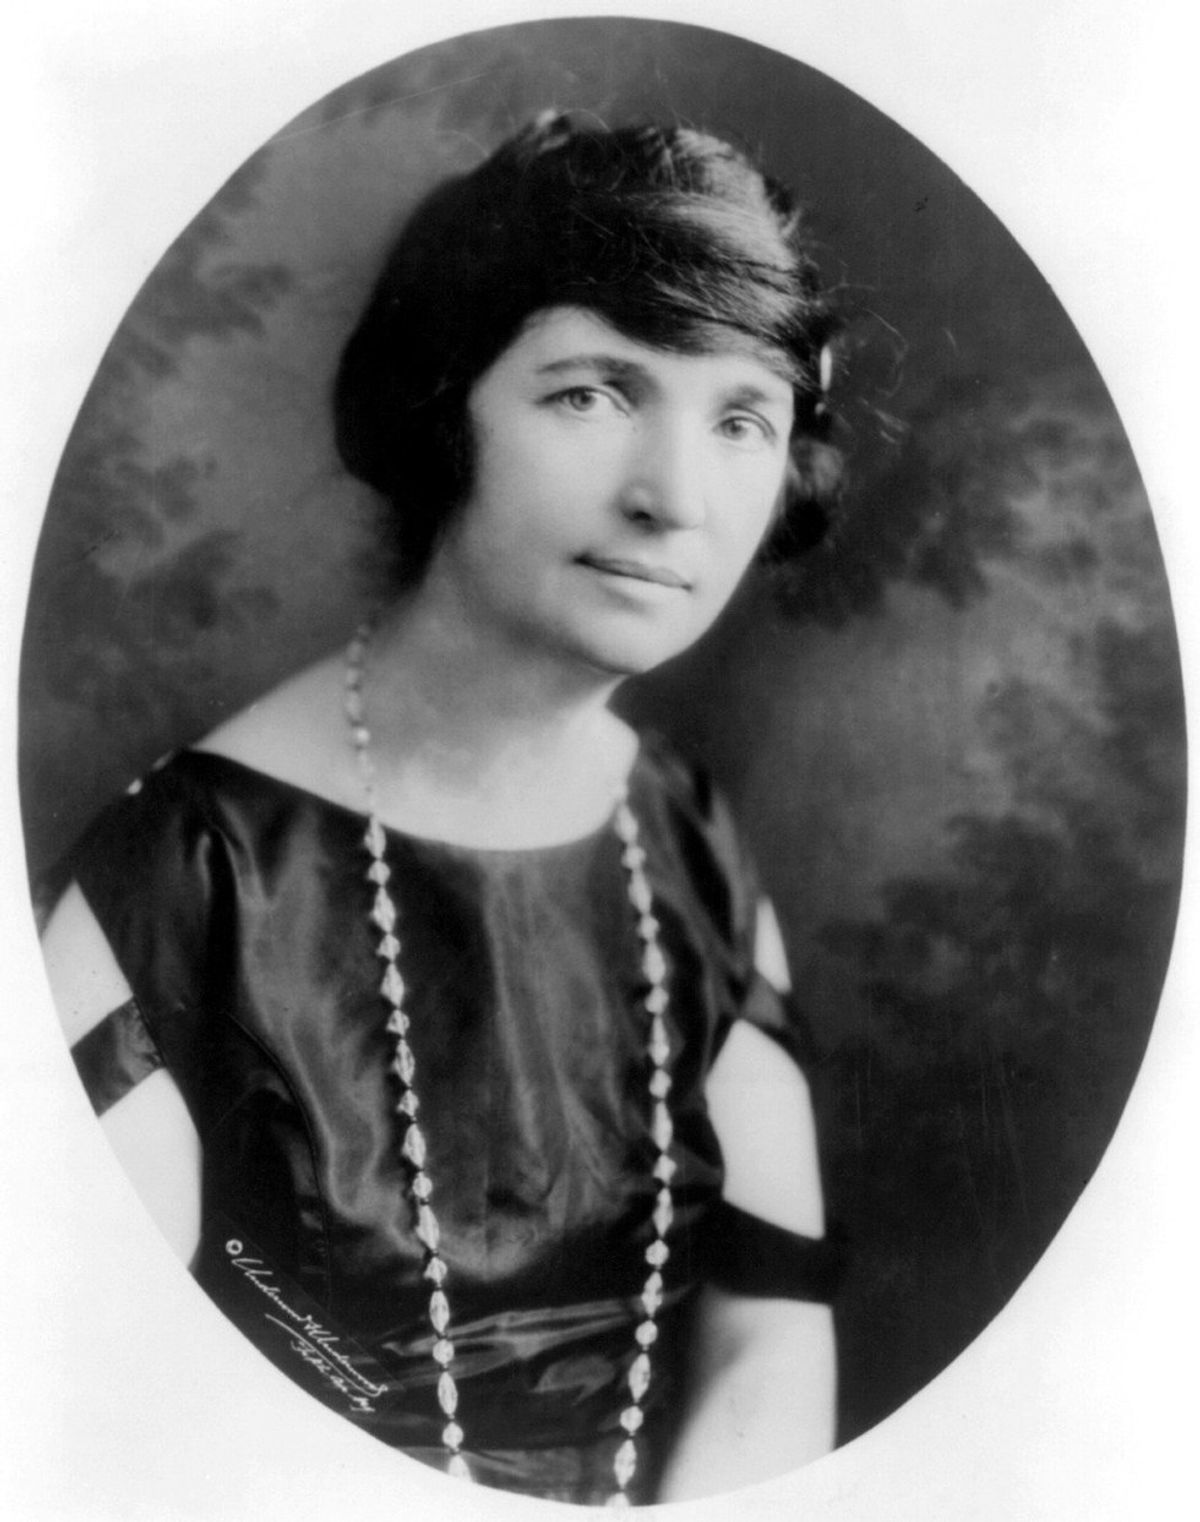 "Are You Kidding Me?" By Margaret Sanger (The Woman Who Gave You Birth Control)